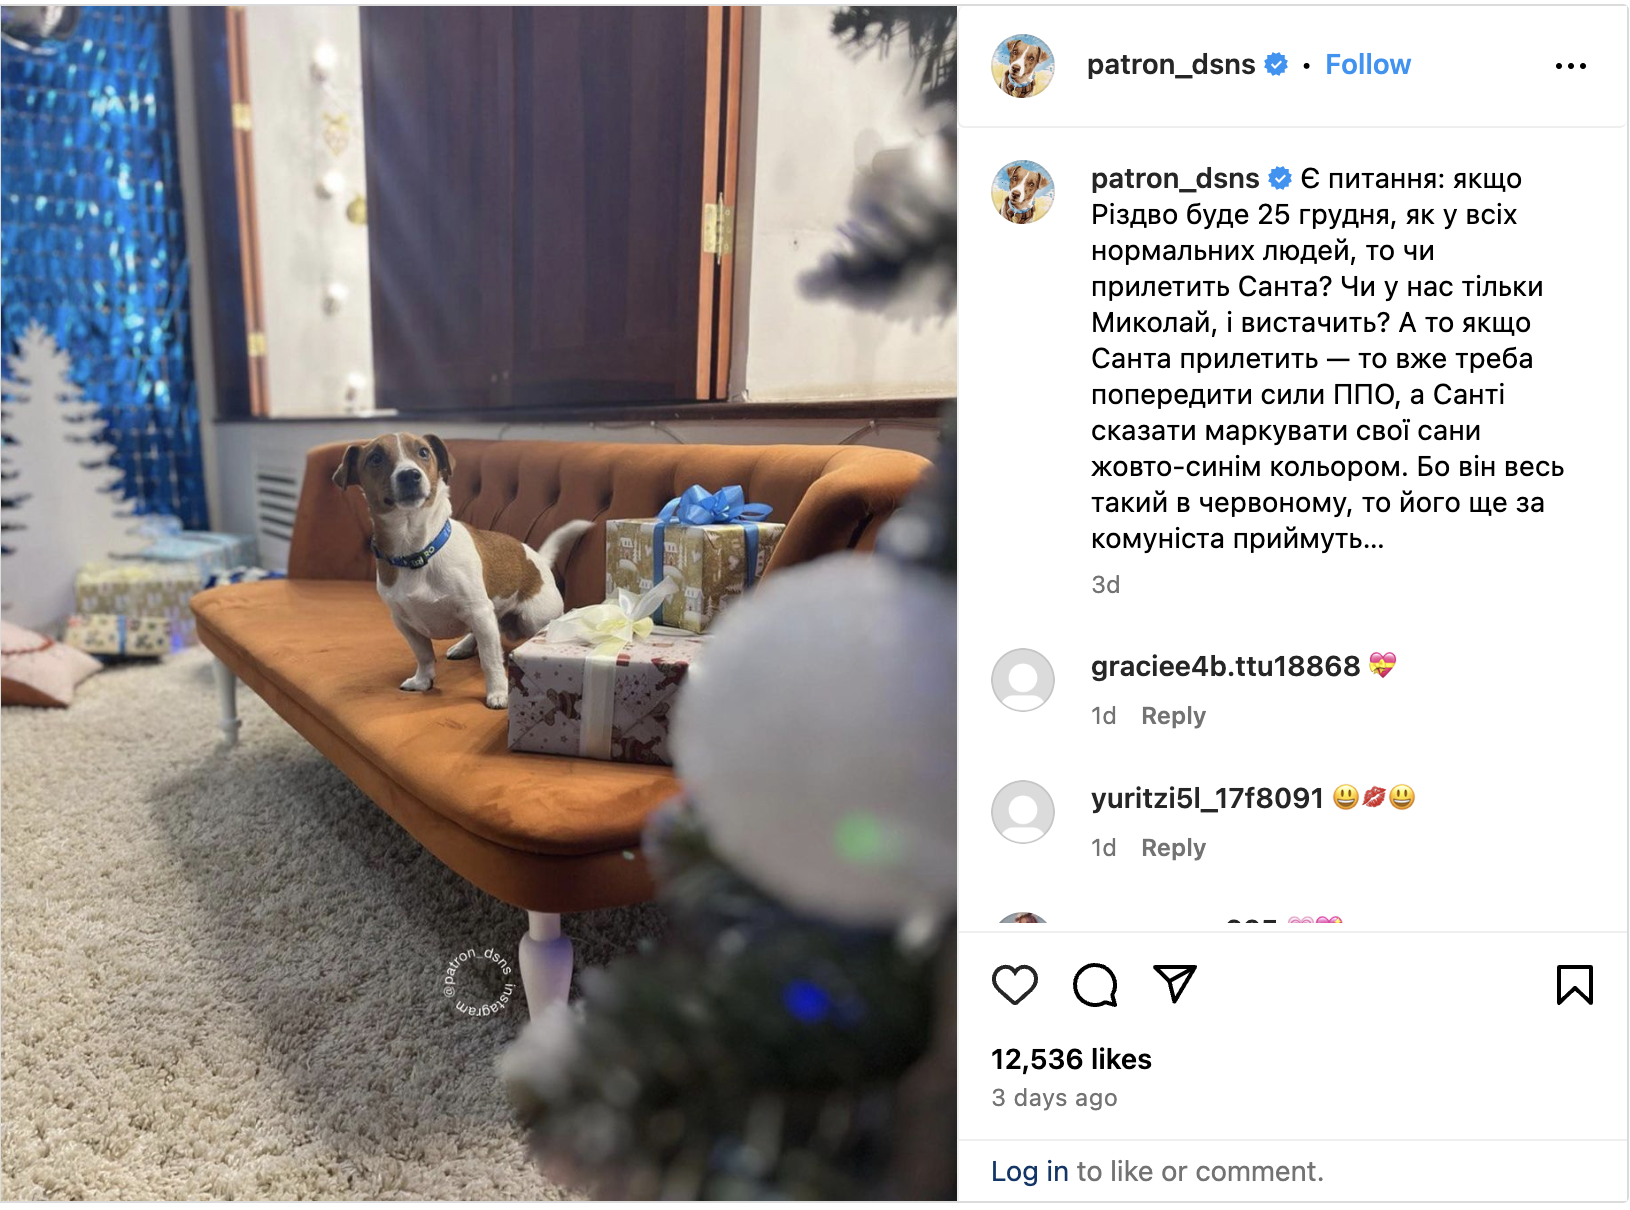 Screen grab of a picture of Patron the sapper dog from his official Instagram. The picture is from 19 DEC 2023. Patron is a short haired Jack Russell terrier. He is wearing a blue Patron Ukraine collar and is standing on a chocolate brown colored couch next to several wrapped presents. In the right foregroud are branches from a Christmas tree. The caption, which is written in Ukrainian Cyrillic, machine translates as: "Christmas will be on December 25, like all normal people, so will Santa come? Or will we just have St. Nicholas and that's it? If Santa does come, then we should warn the air defense forces and tell Santa to mark his sleigh with yellow and blue colors. Because he's all dressed in red, they'll take him for a communist..."